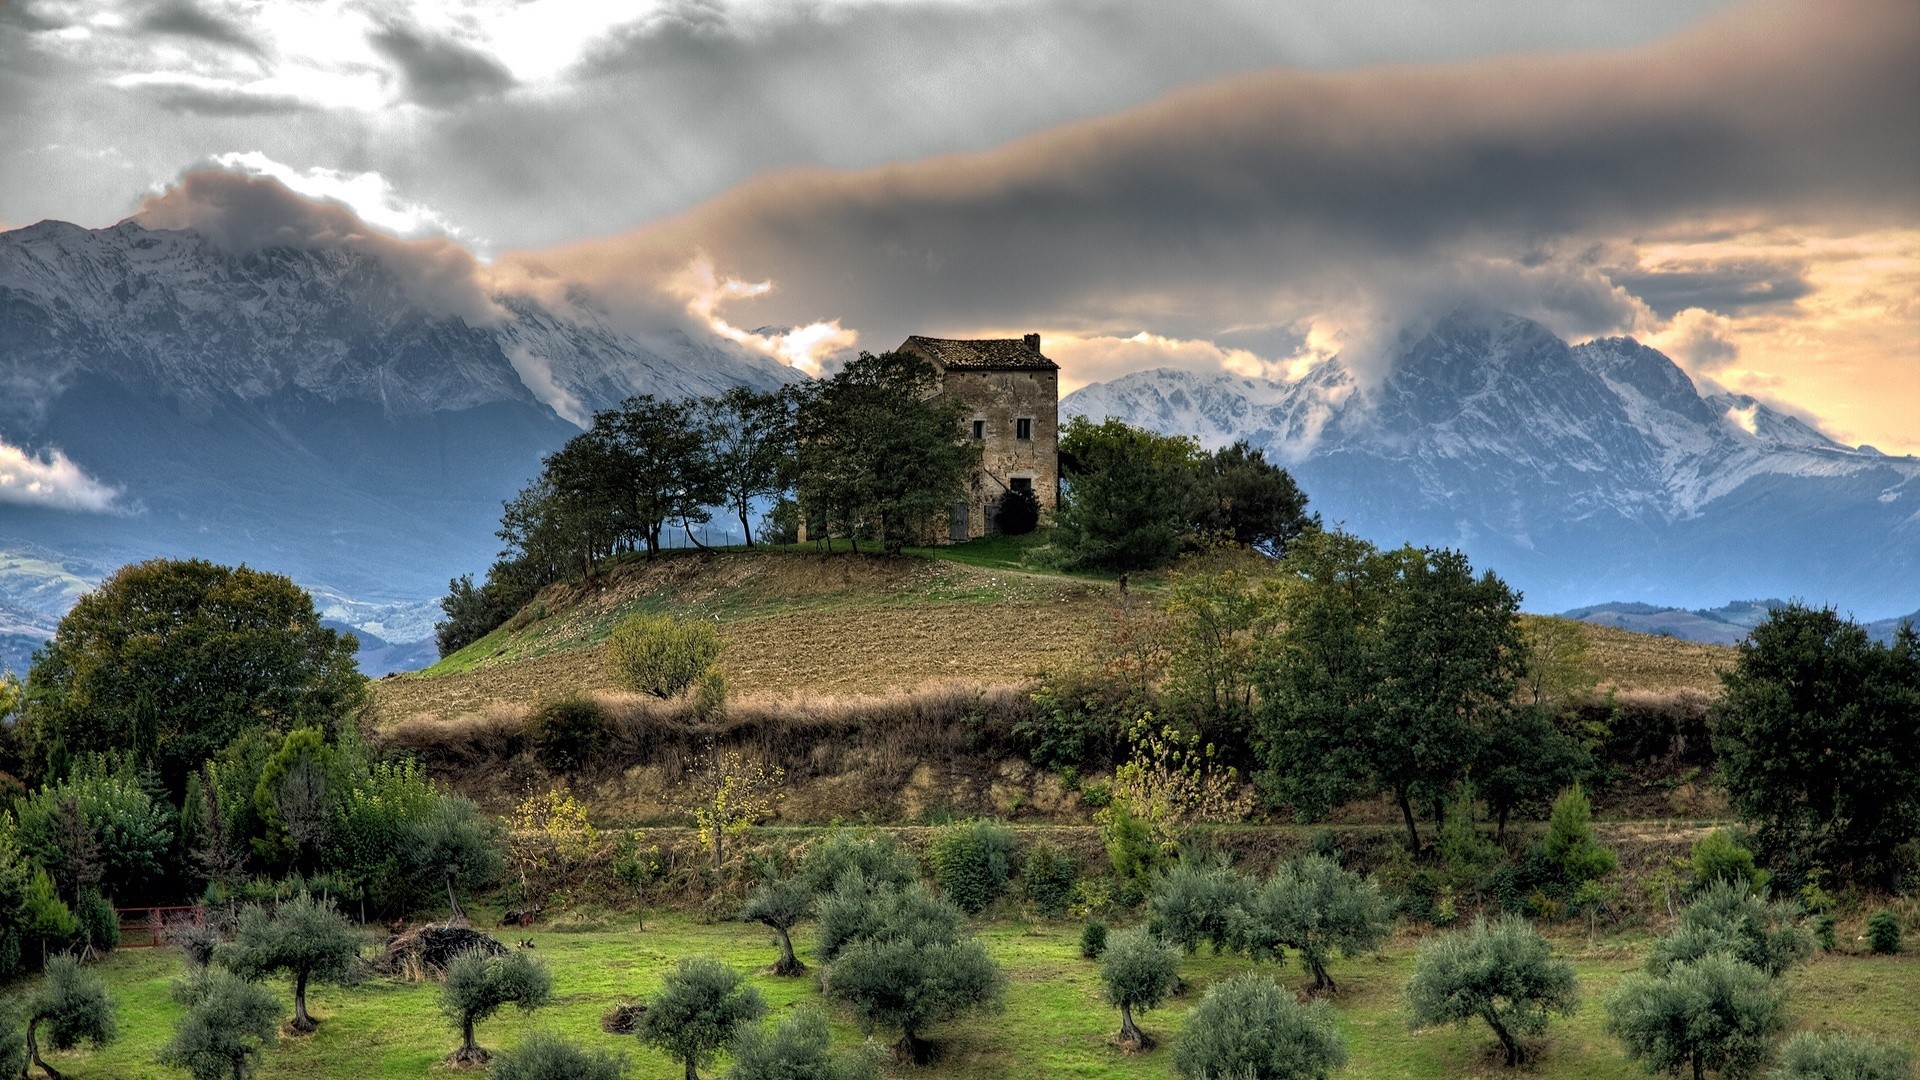 General 1920x1080 HDR nature landscape old building mountains hills Italy sky